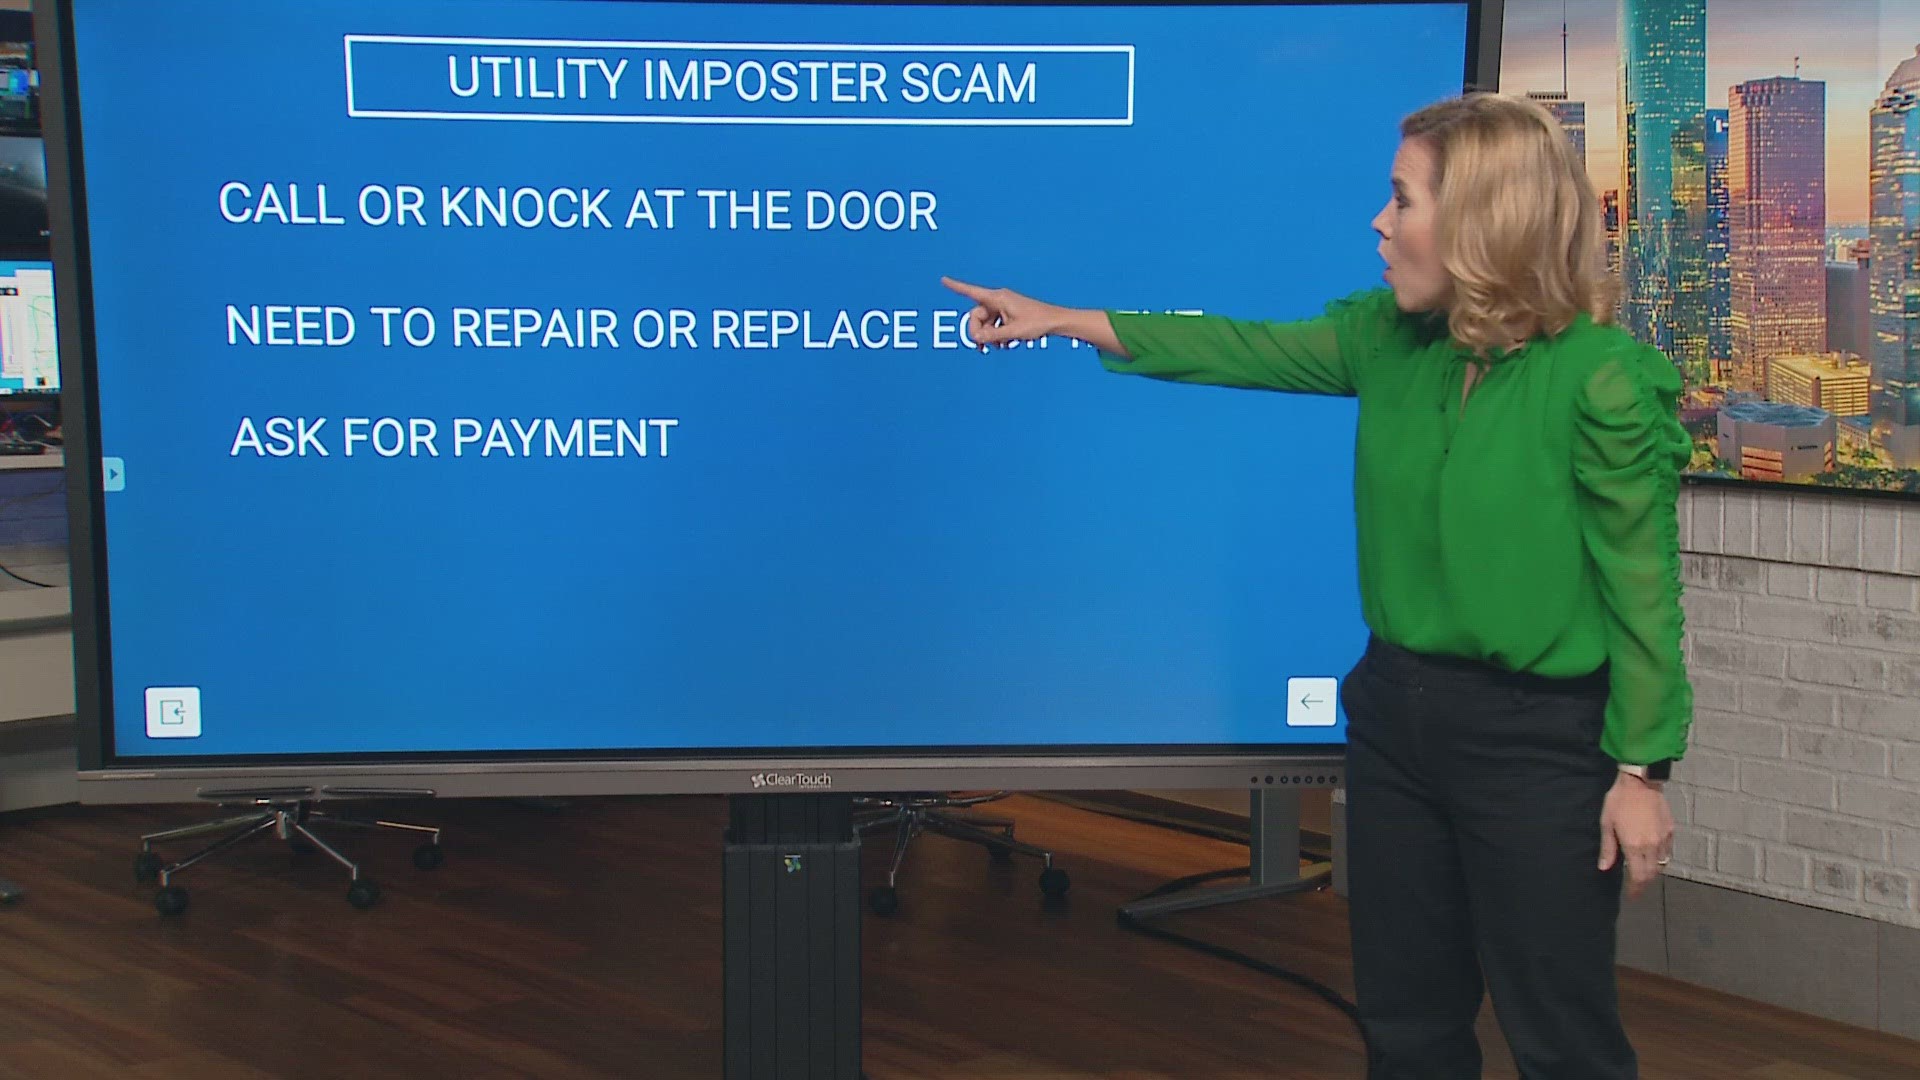 It's called the "Utility Imposter Scam." After a weather event, someone calls or knocks on your door saying they need to repair or replace equipment. They then ask f